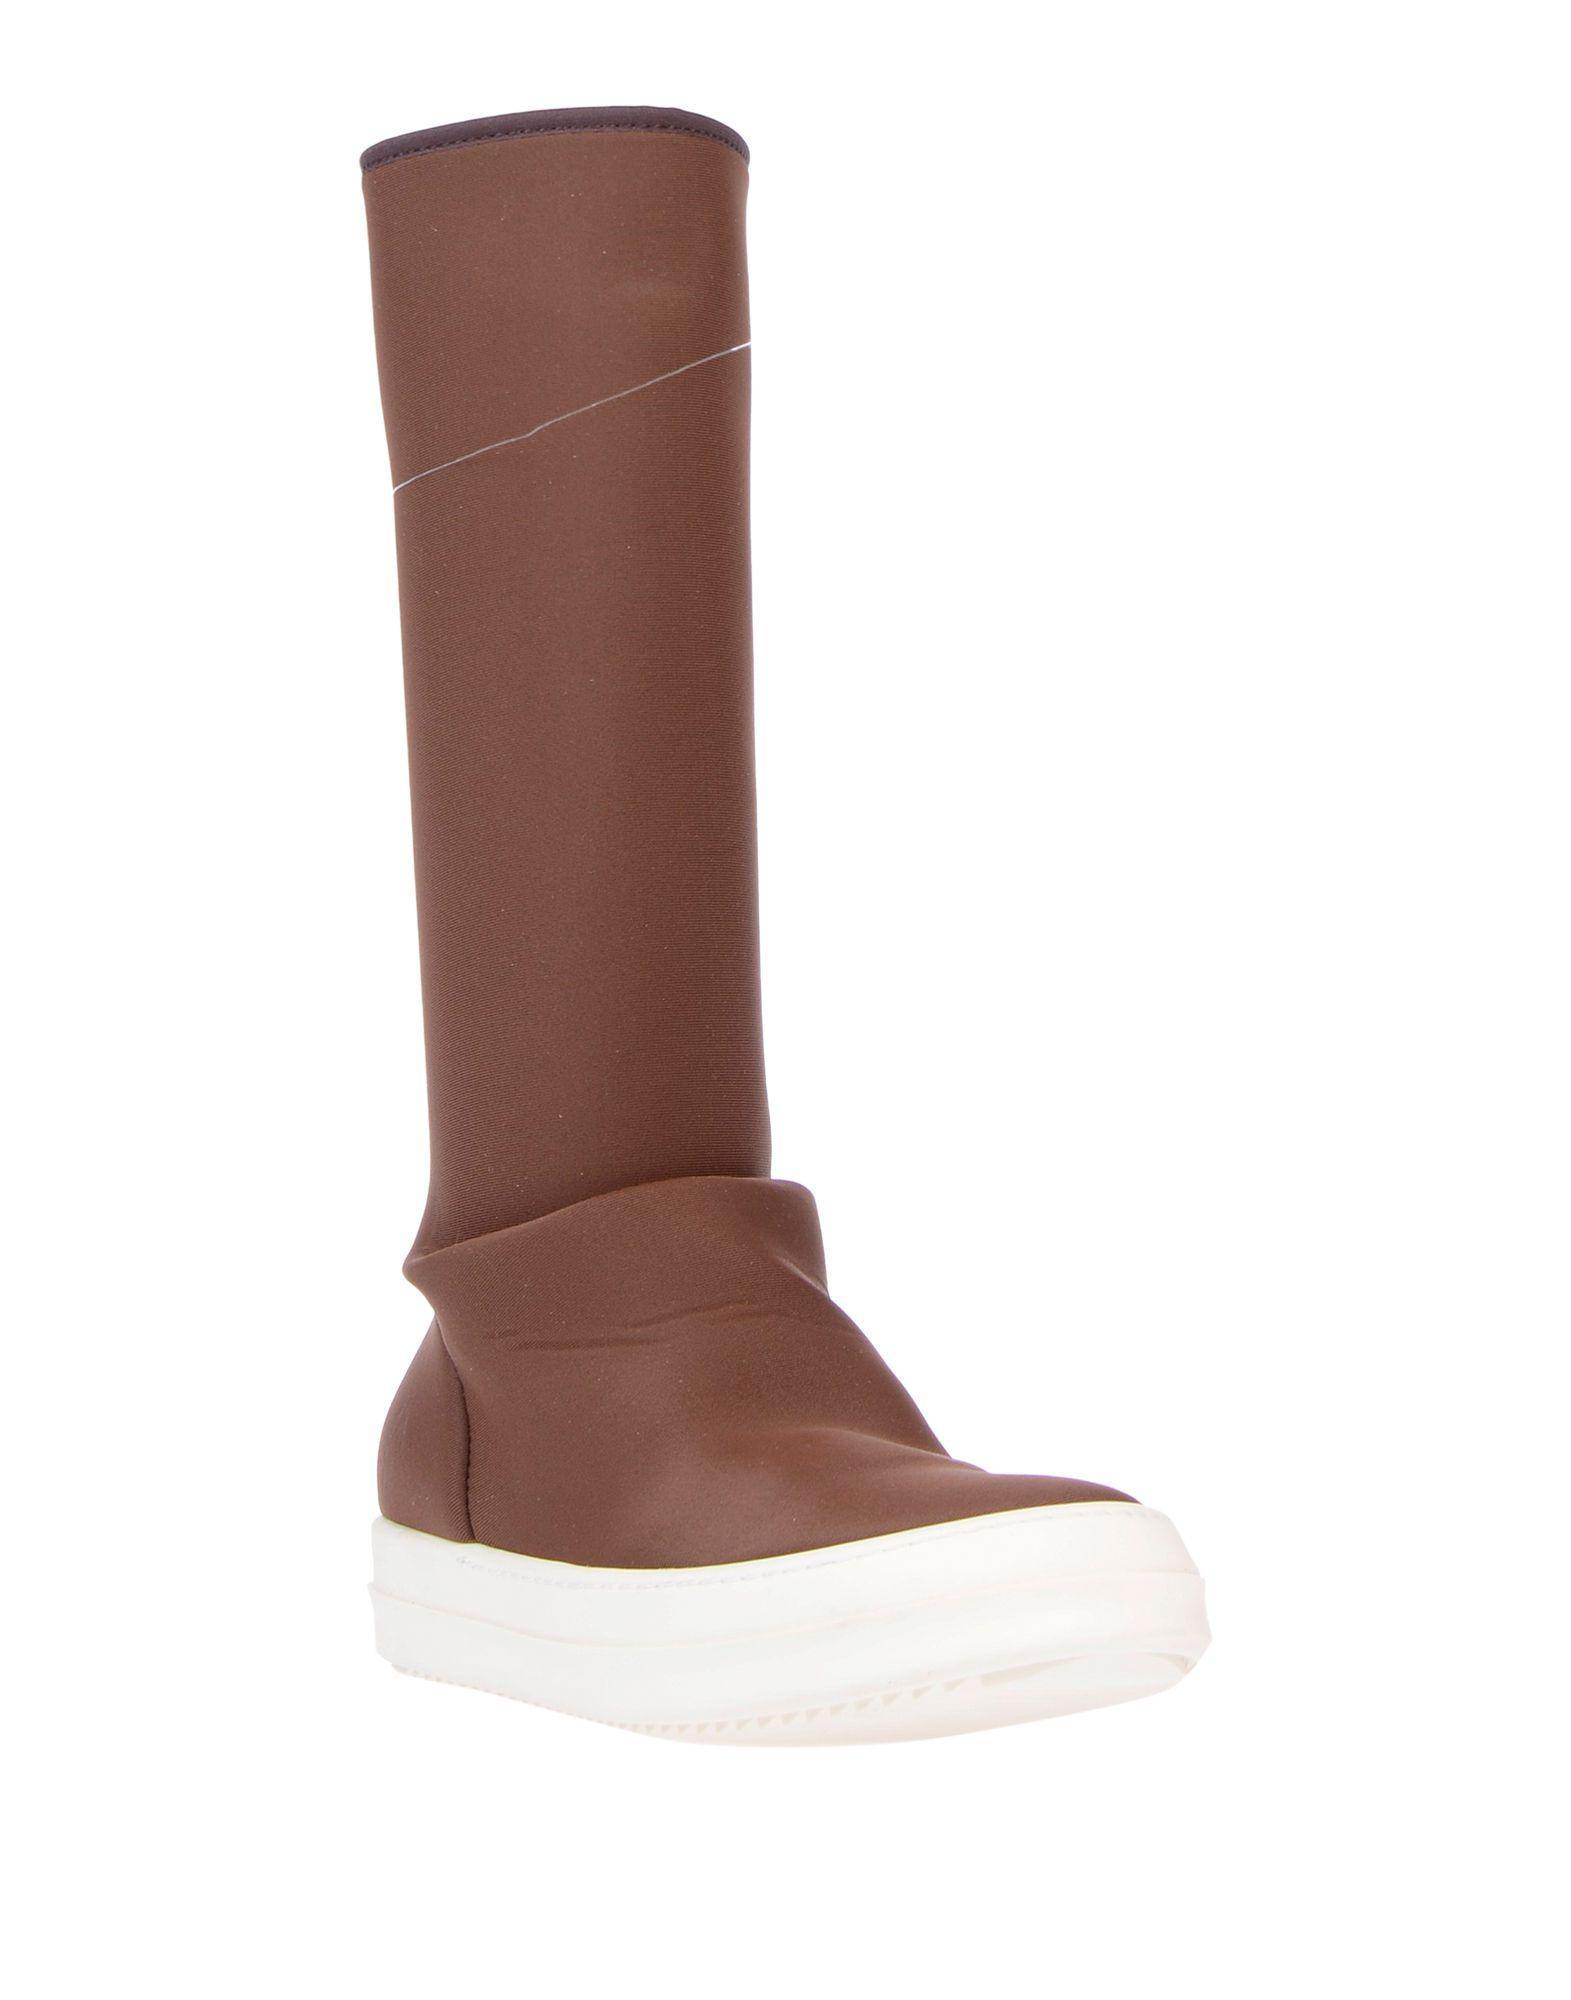 Rick Owens Drkshdw Boots in Brown - Lyst